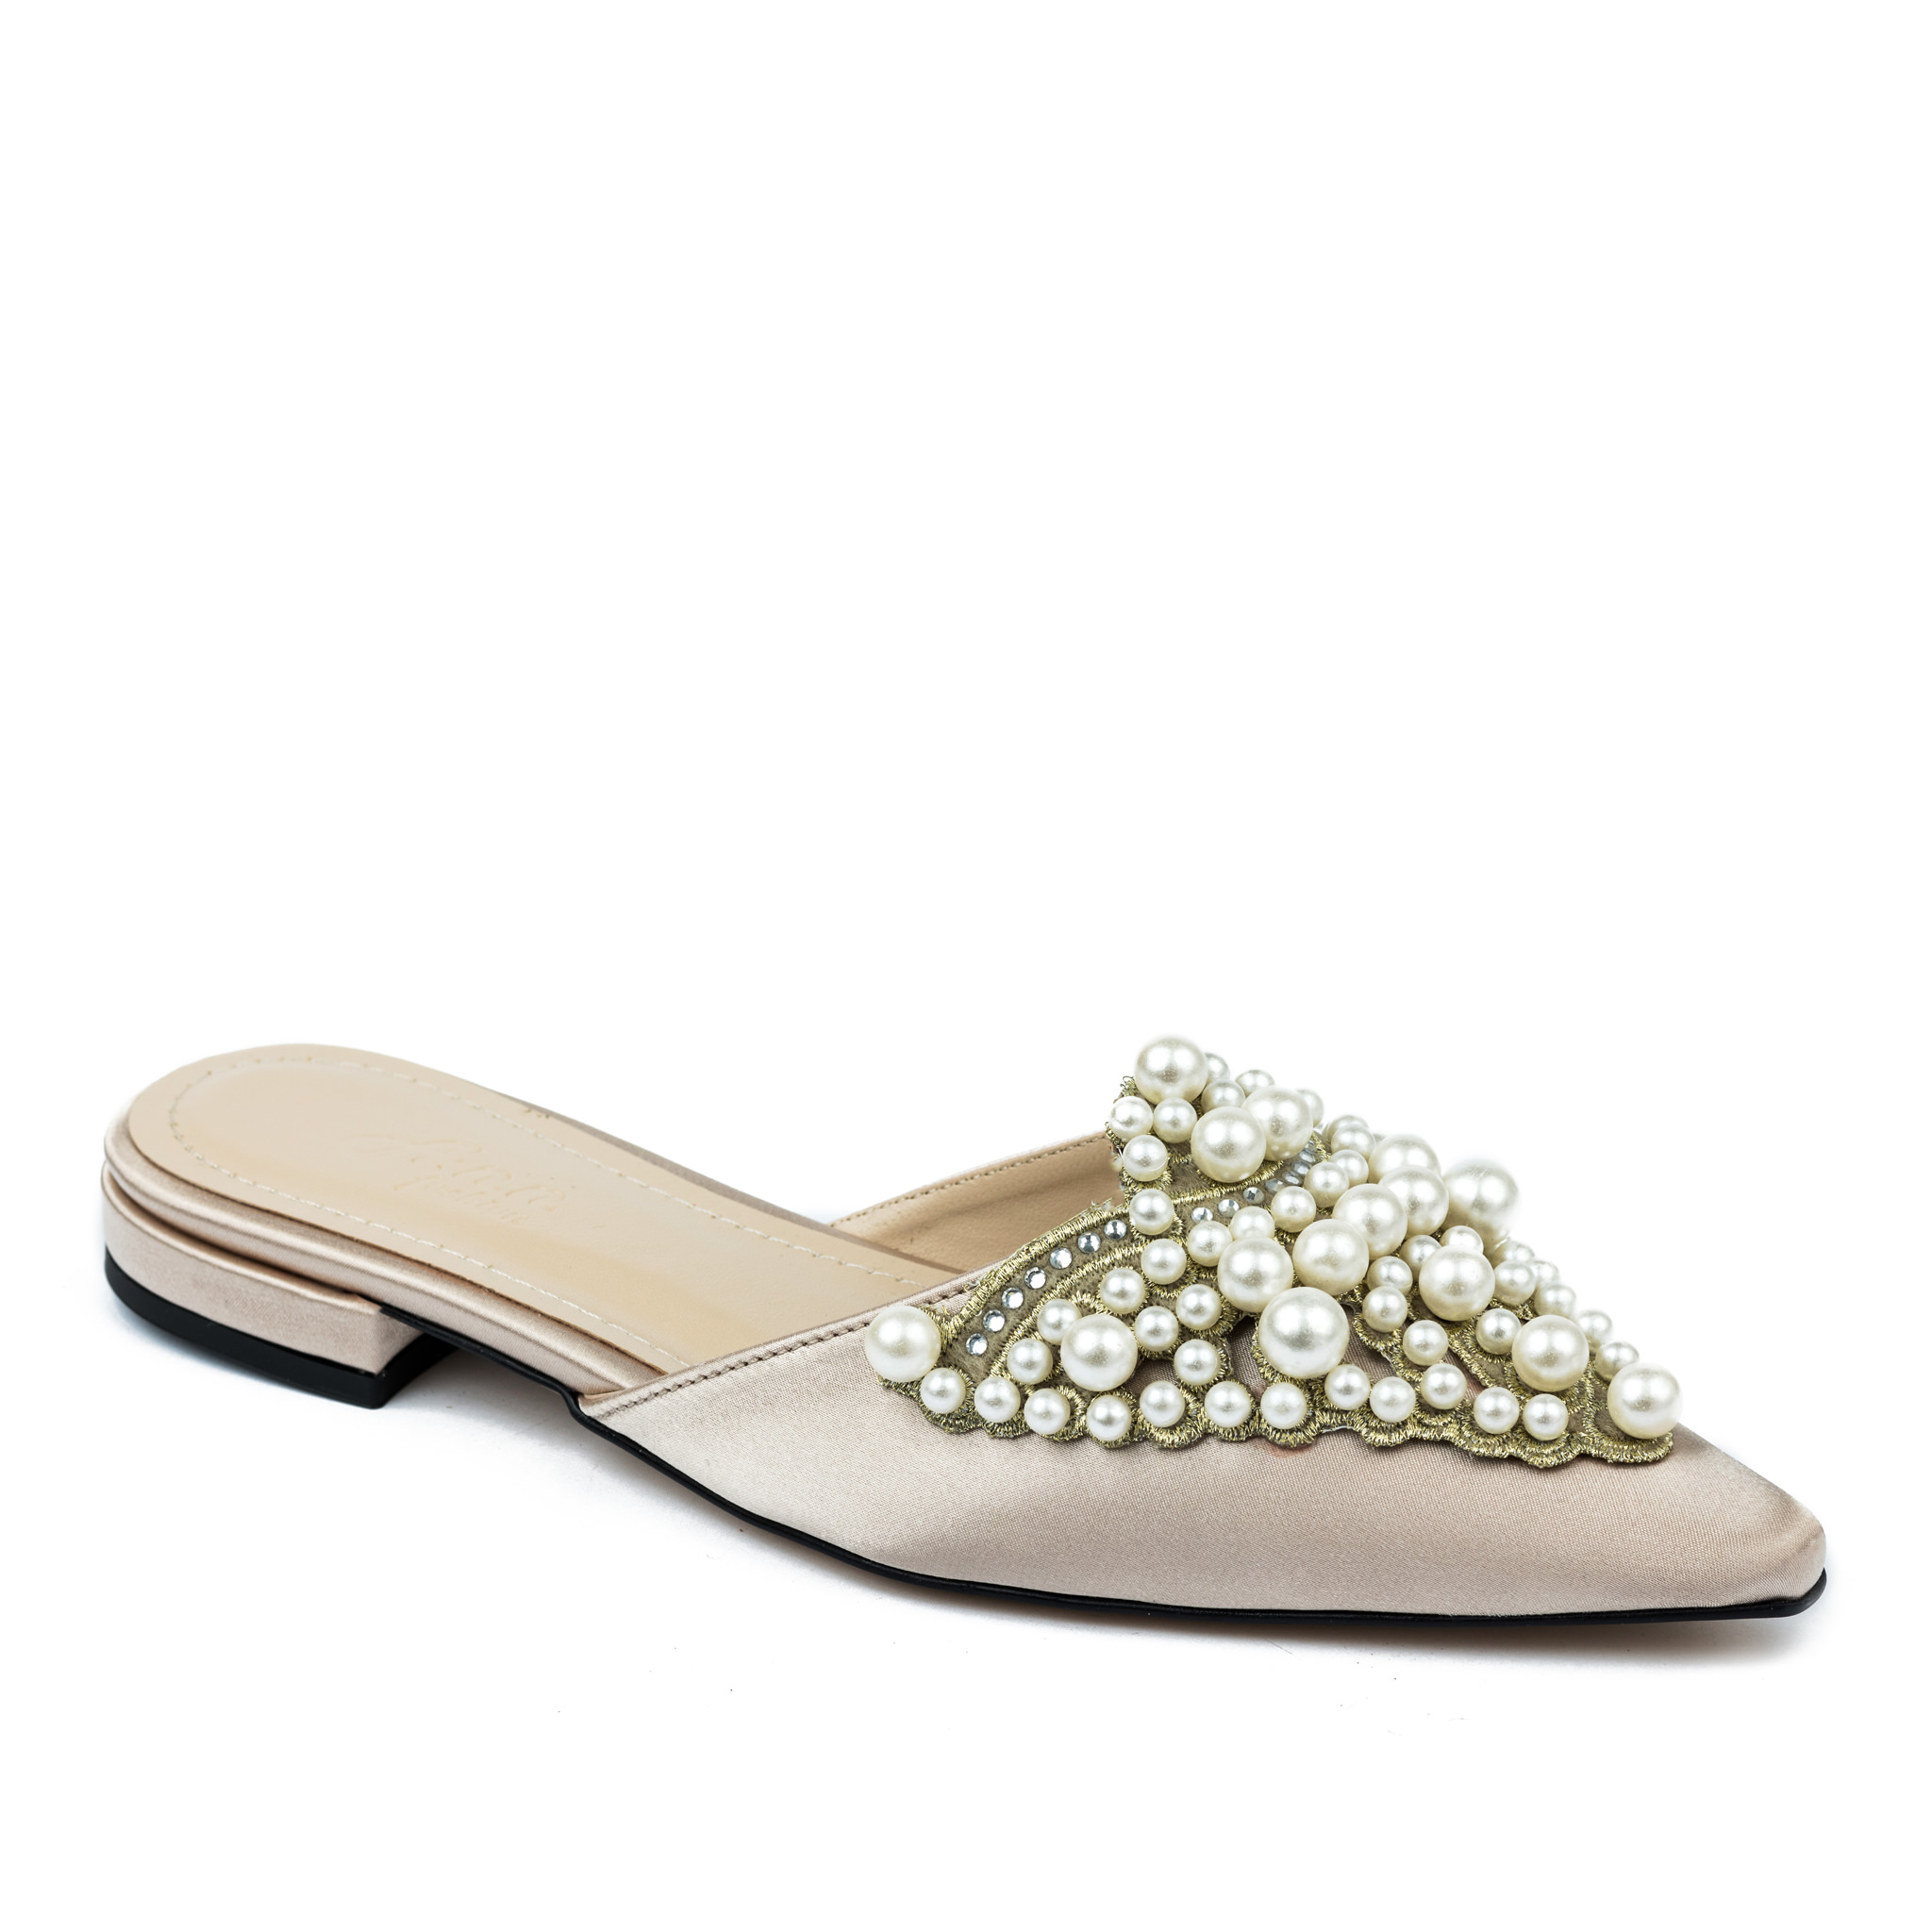 Women Slippers and Mules A661 - BEIGE